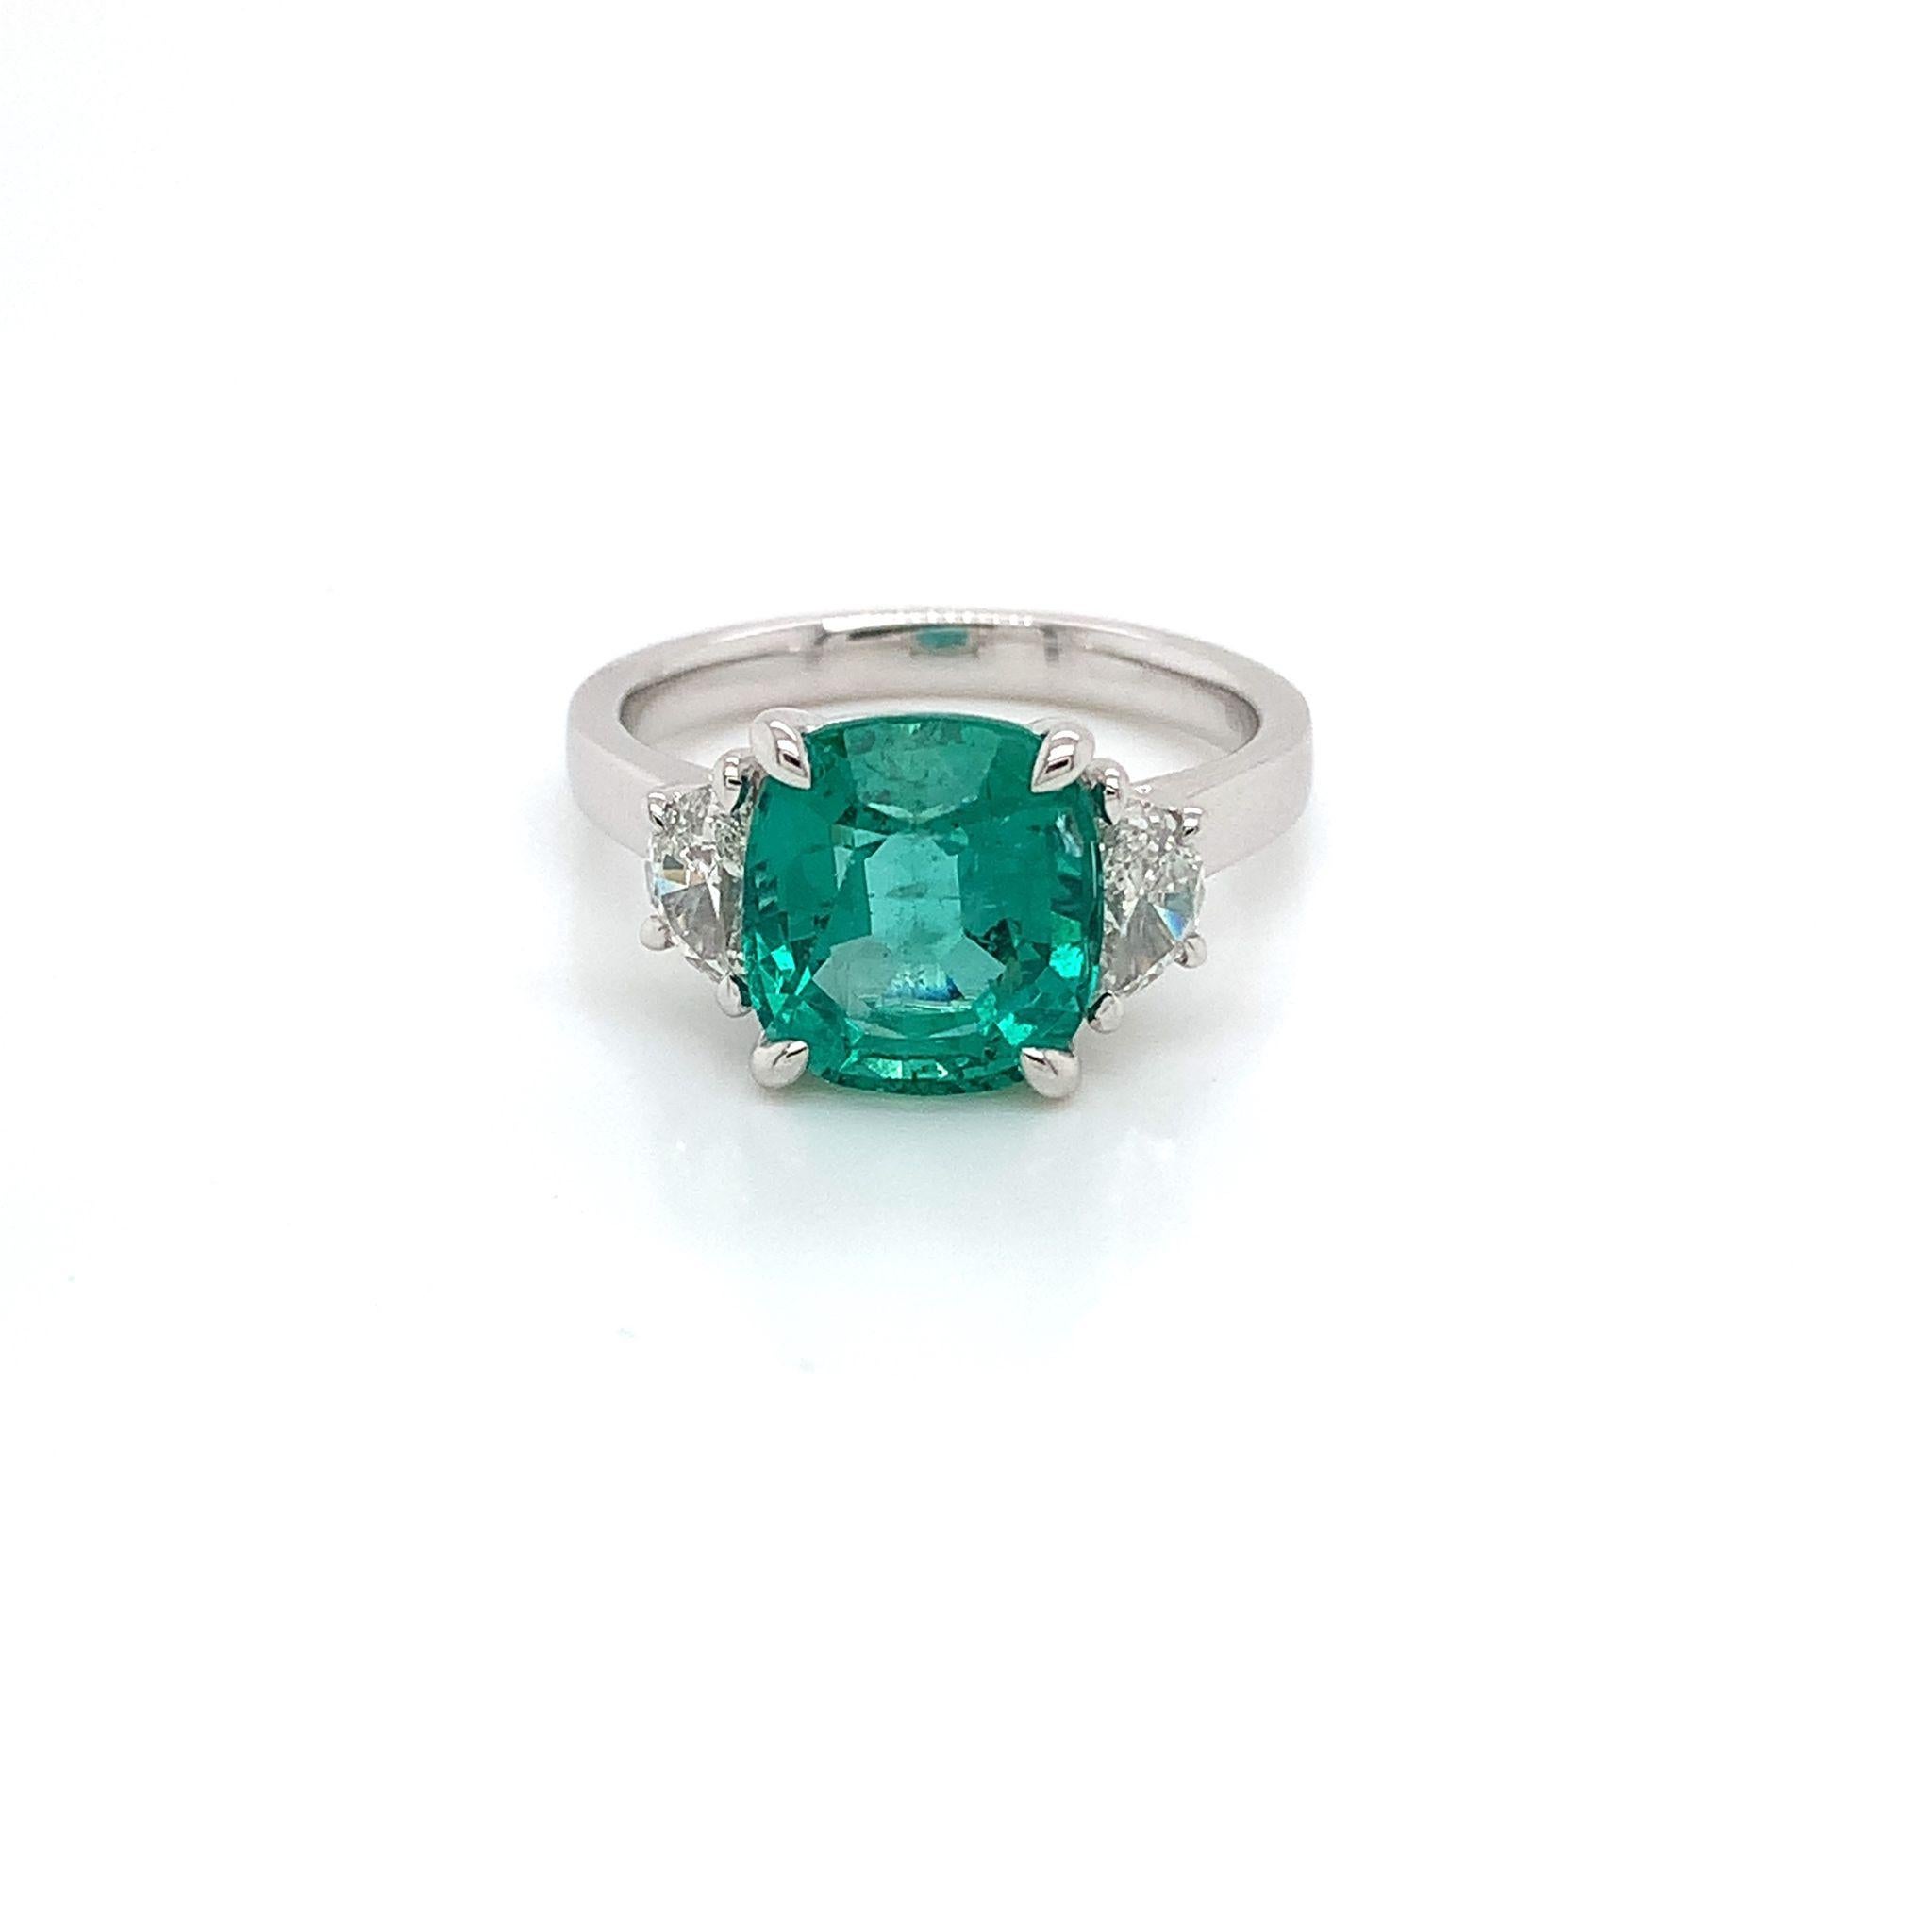 Certified 3.44 ct cushion Emerald
Measuring (9.8x8.9) mm
One Pair of half moon diamonds weighing .48 cts
Diamonds measuring (5.5x3.0) mm
Set in 18K white gold ring
Weighing 5.26 grams